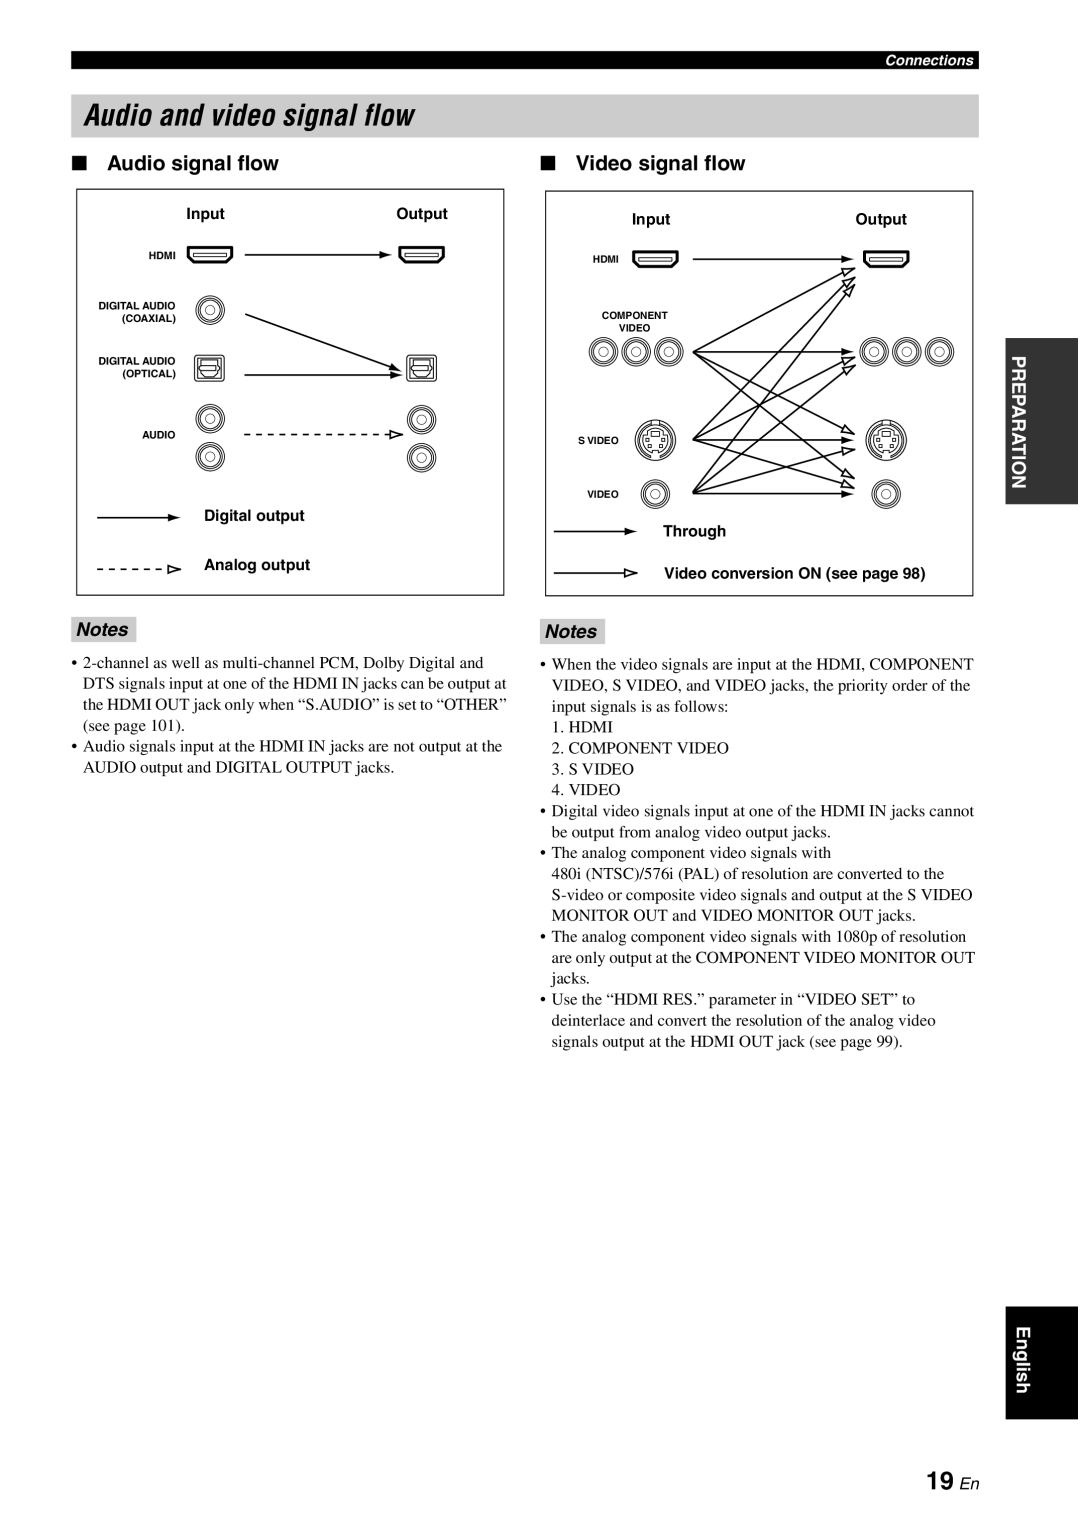 Yamaha HTR-6180 owner manual Audio and video signal flow, 19 En, Audio signal flow, Video signal flow, Notes 